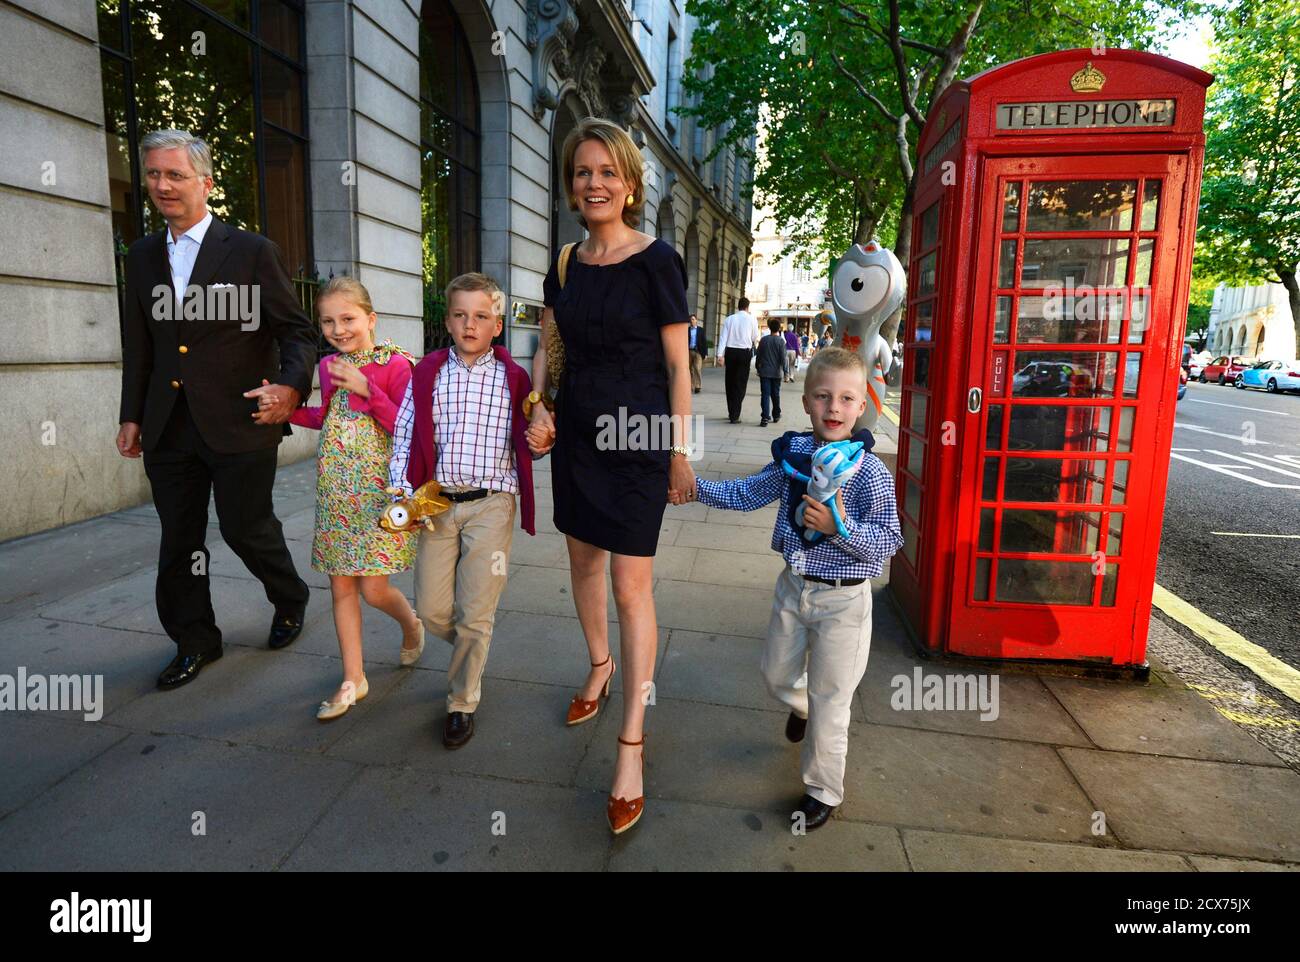 (L-R) Belgium's Prince Philippe, Princess Elisabeth, Prince Gabriel, Crown Princess Mathilde and Prince Emmanuel visit central London on the eve of the opening ceremony the London 2012 Olympic Games July 26, 2012.              REUTERS/Benoit Doppagne/Pool    (BRITAIN  - Tags: SPORT ROYALS POLITICS SPORT OLYMPICS) Stock Photo